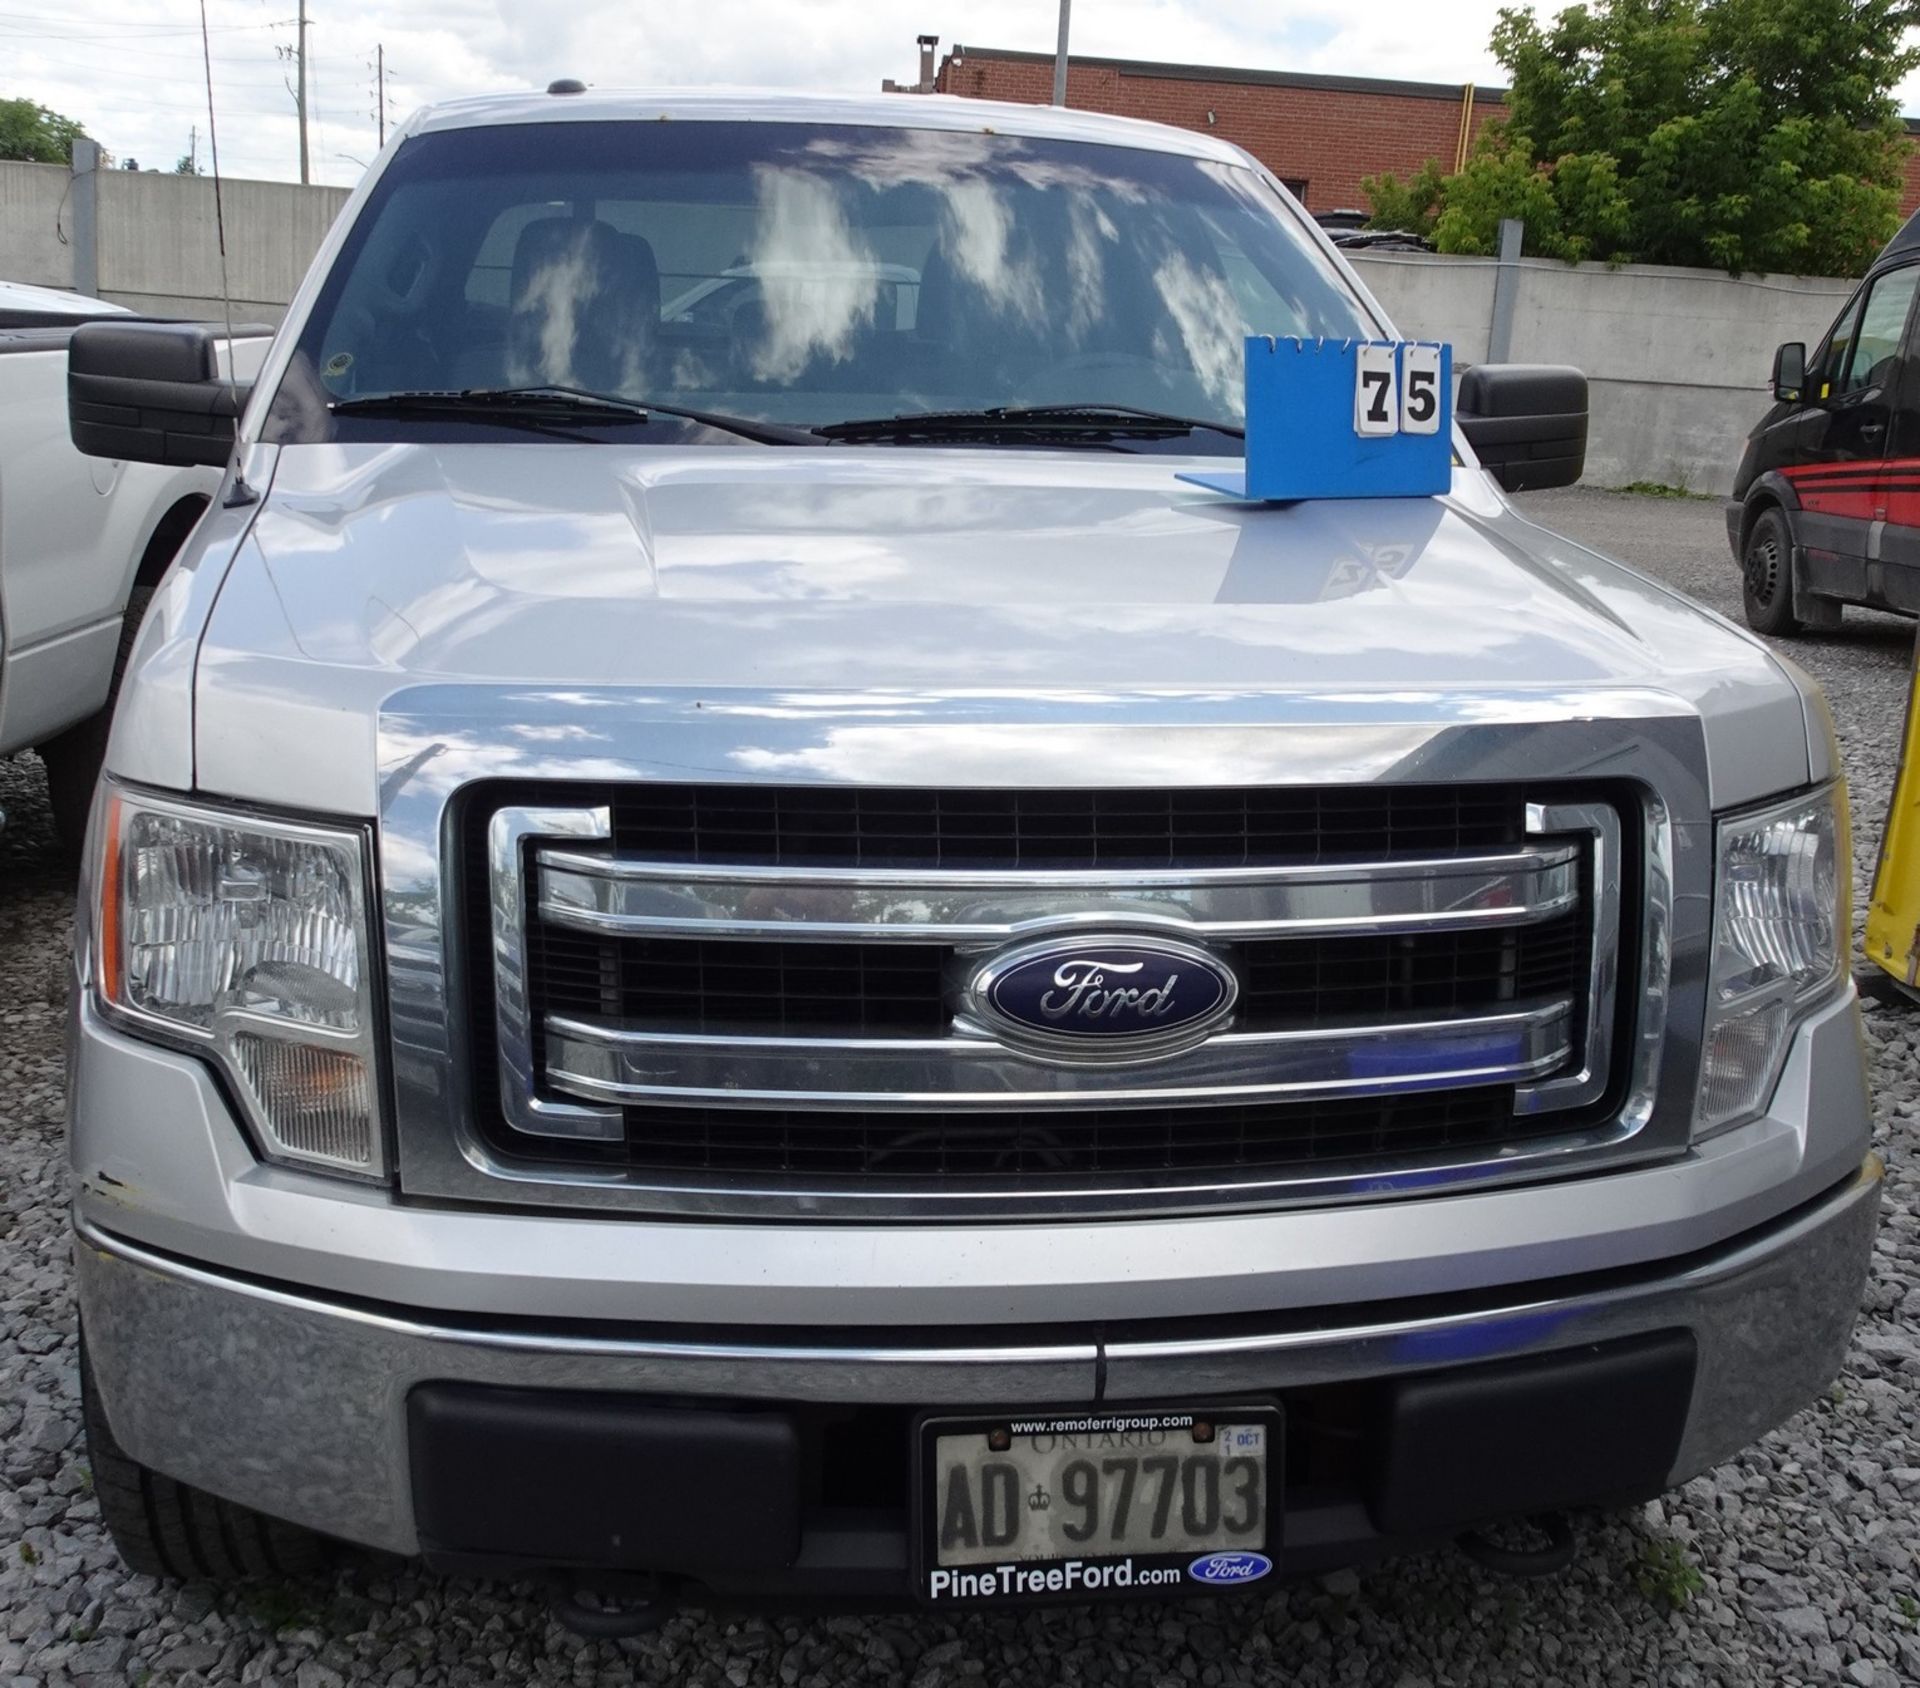 2013 FORD F150 XLT PICK -UP, BOX LINER, 4 X 4, 308,432 KMS, RUNNING BOARDS, BACK RACK, BOX COVER, - Image 2 of 12